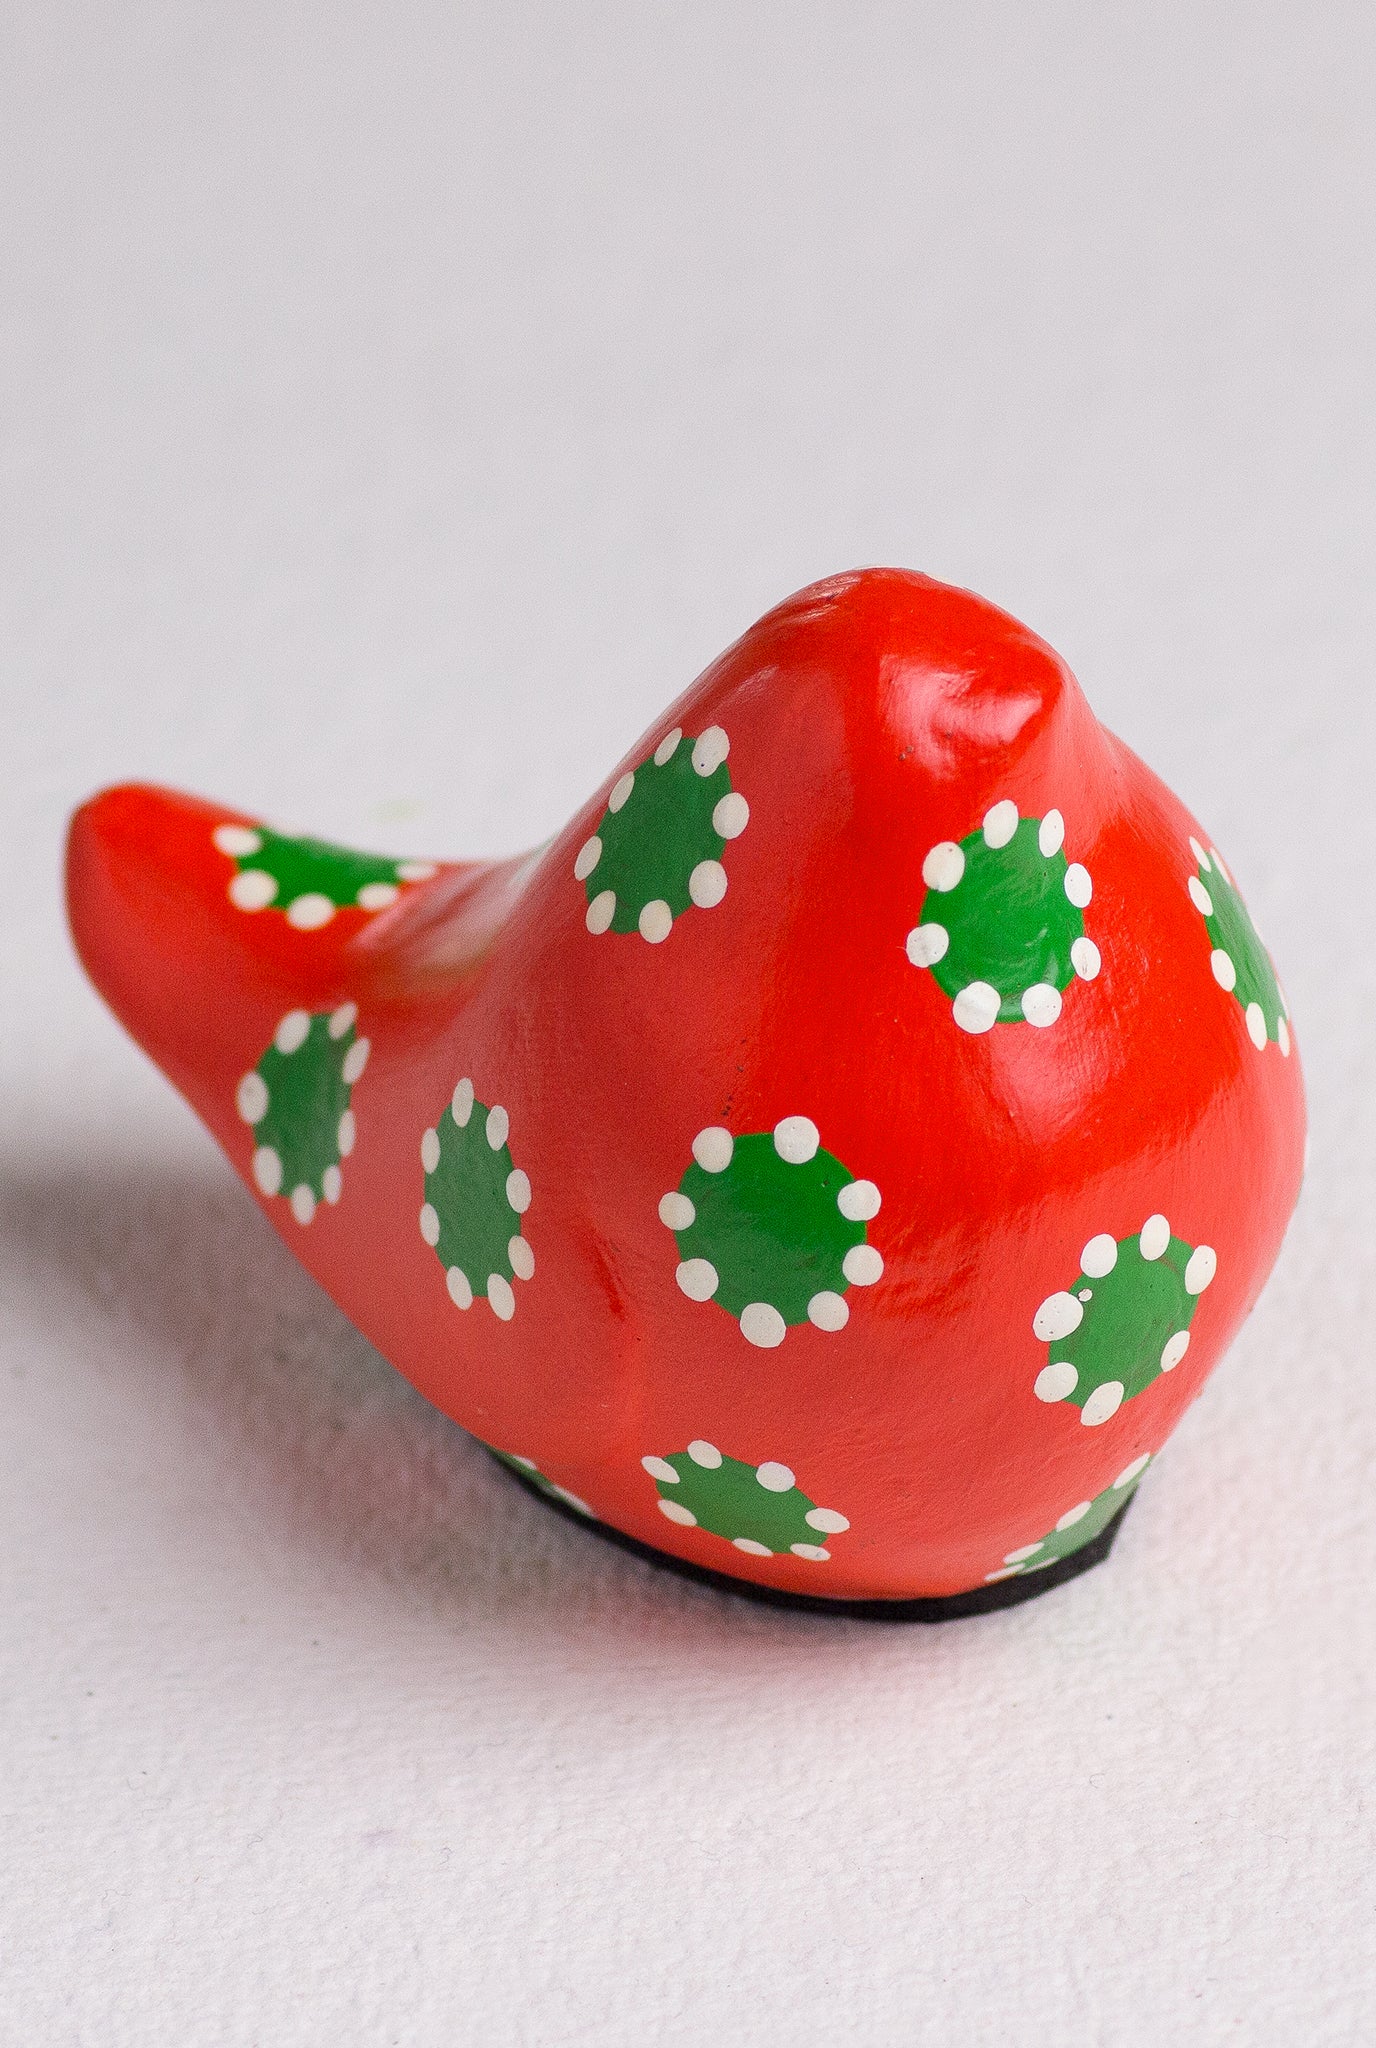 decor-handcrafted-ceramic-hand painted-paperweight